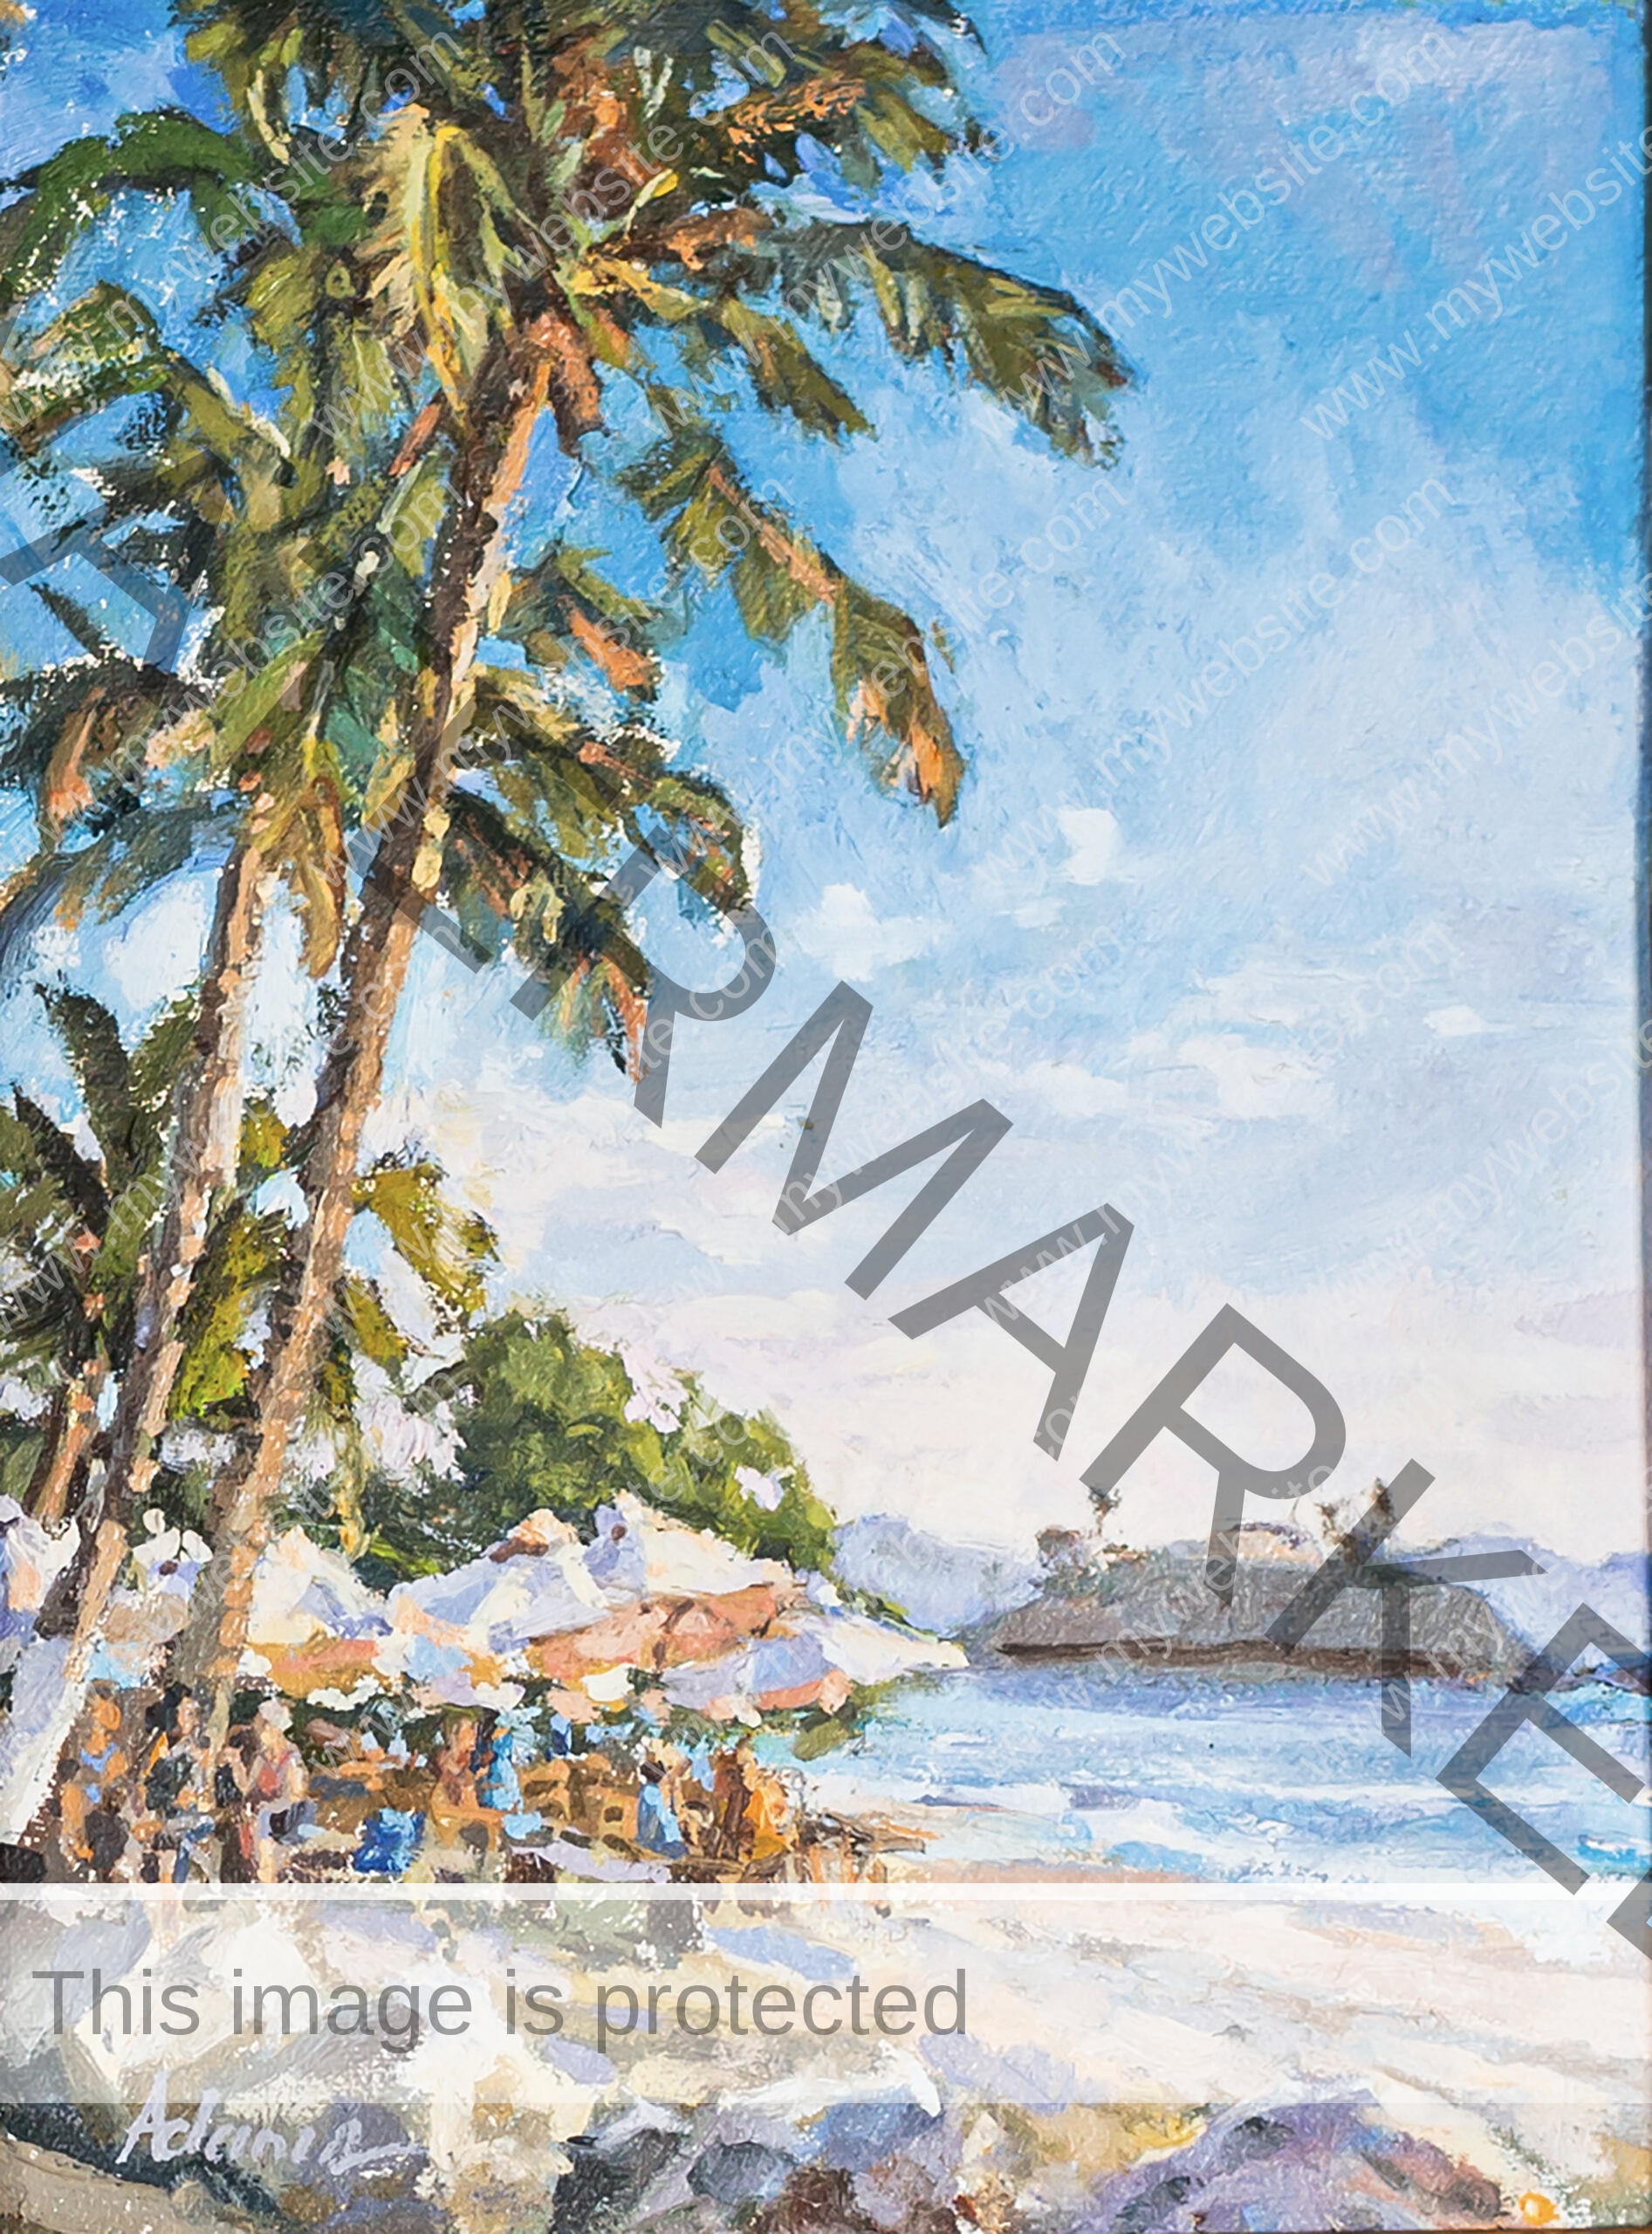 Flamingo beach Impressionist oil painting by Susan Adams, depicting vacationeers lounging on Flamingo beach in Guanacaste underneath beach umbrellas and palm trees.